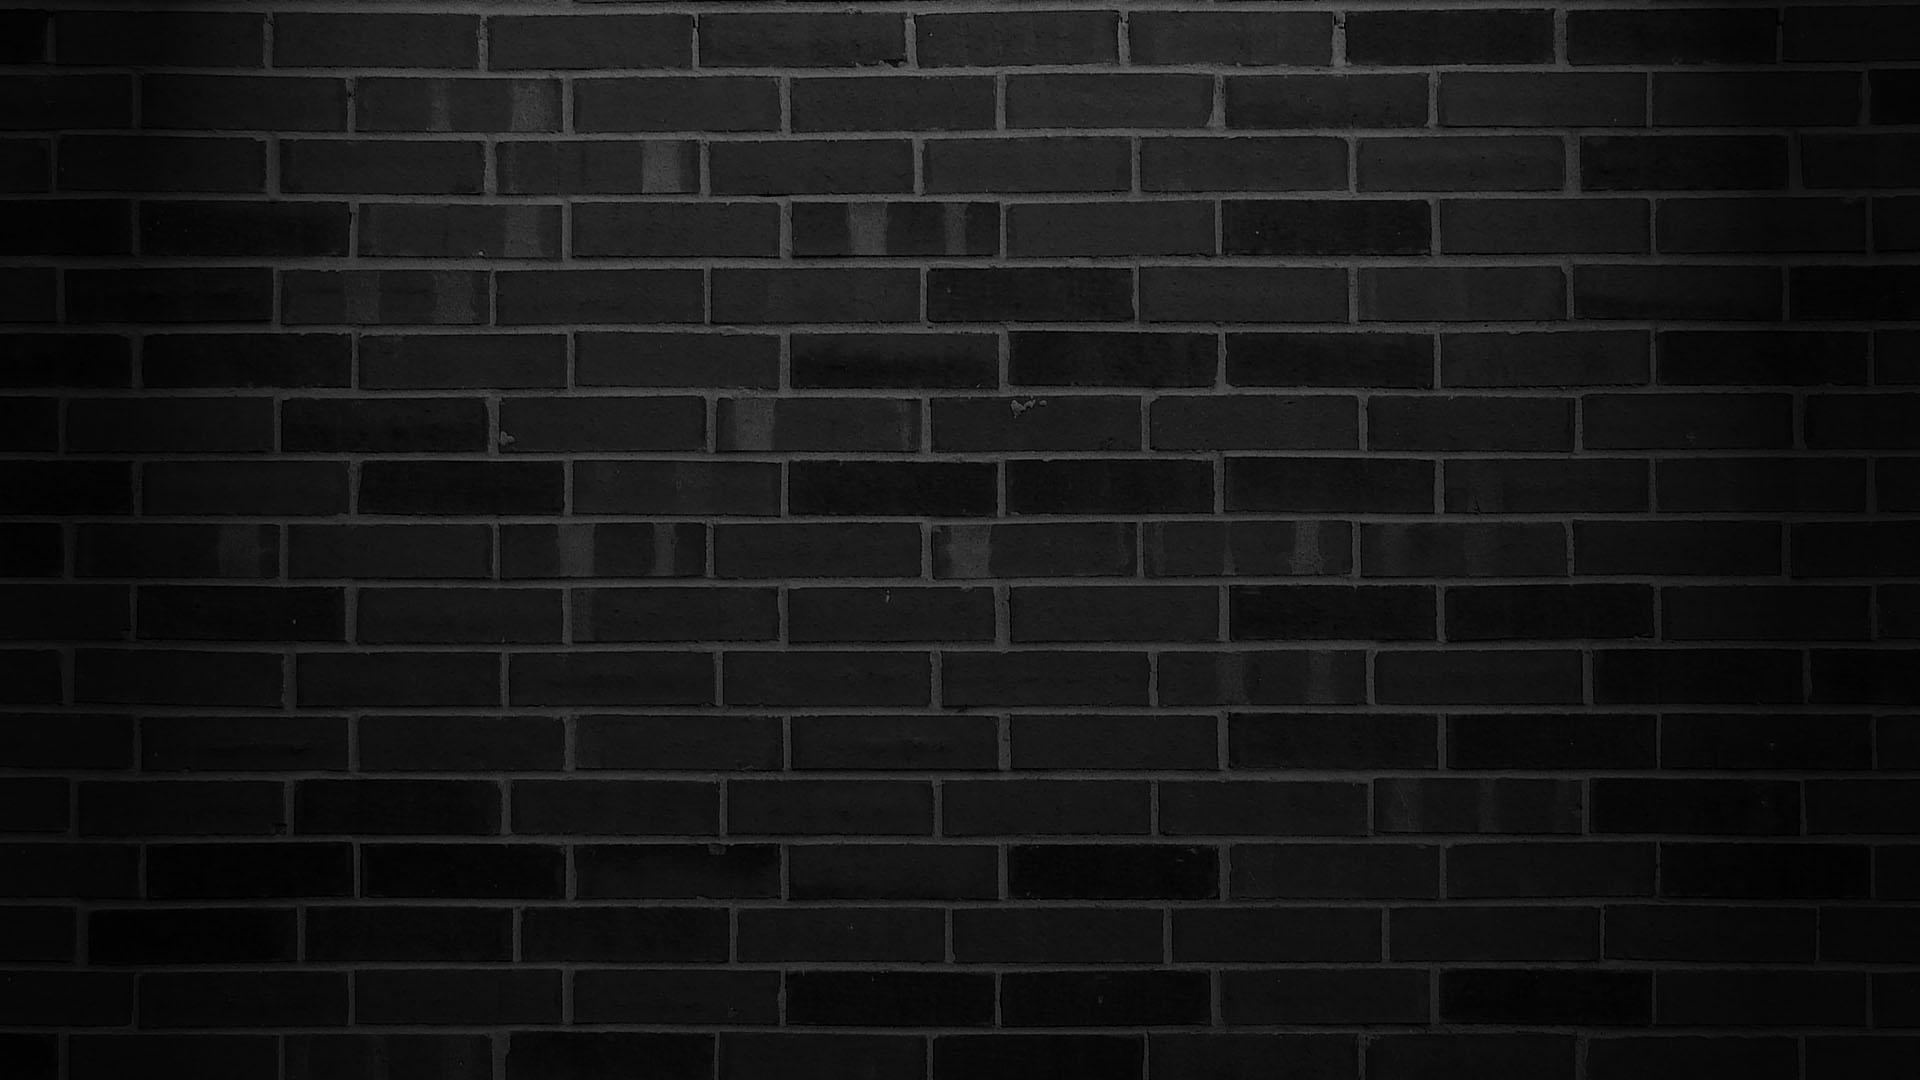 Grunge red abstract background with black bricks inside.